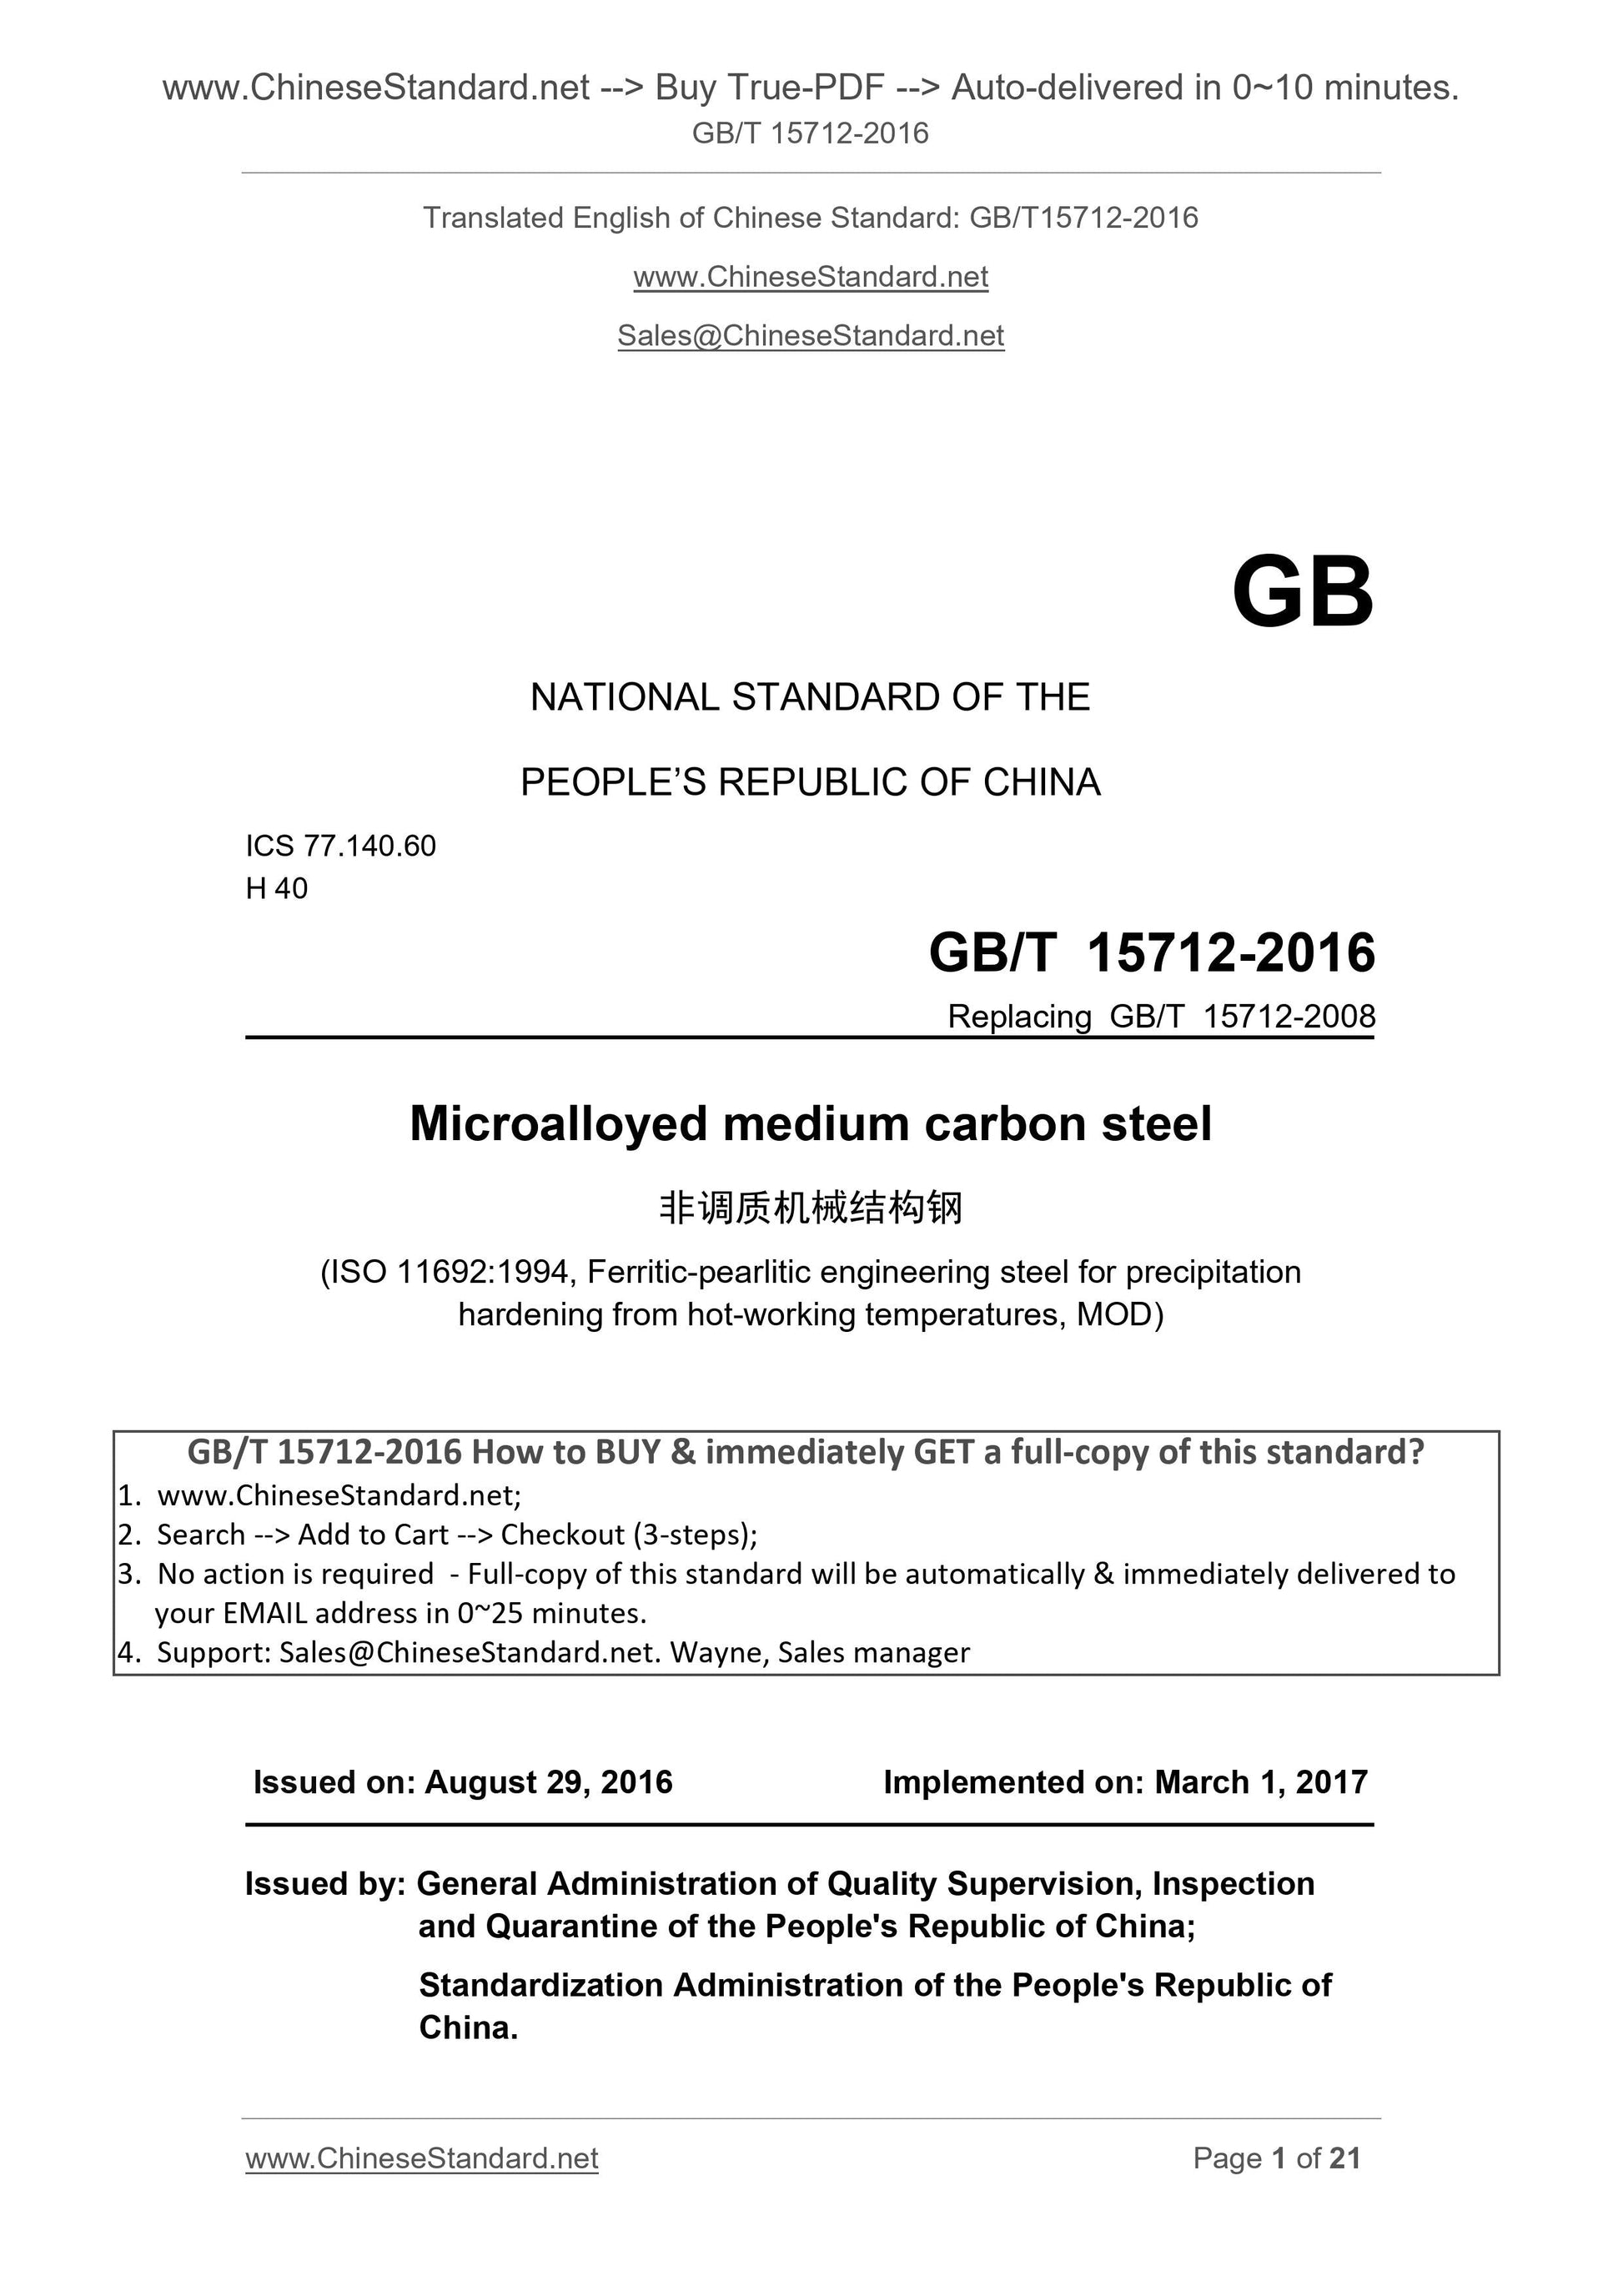 GB/T 15712-2016 Page 1